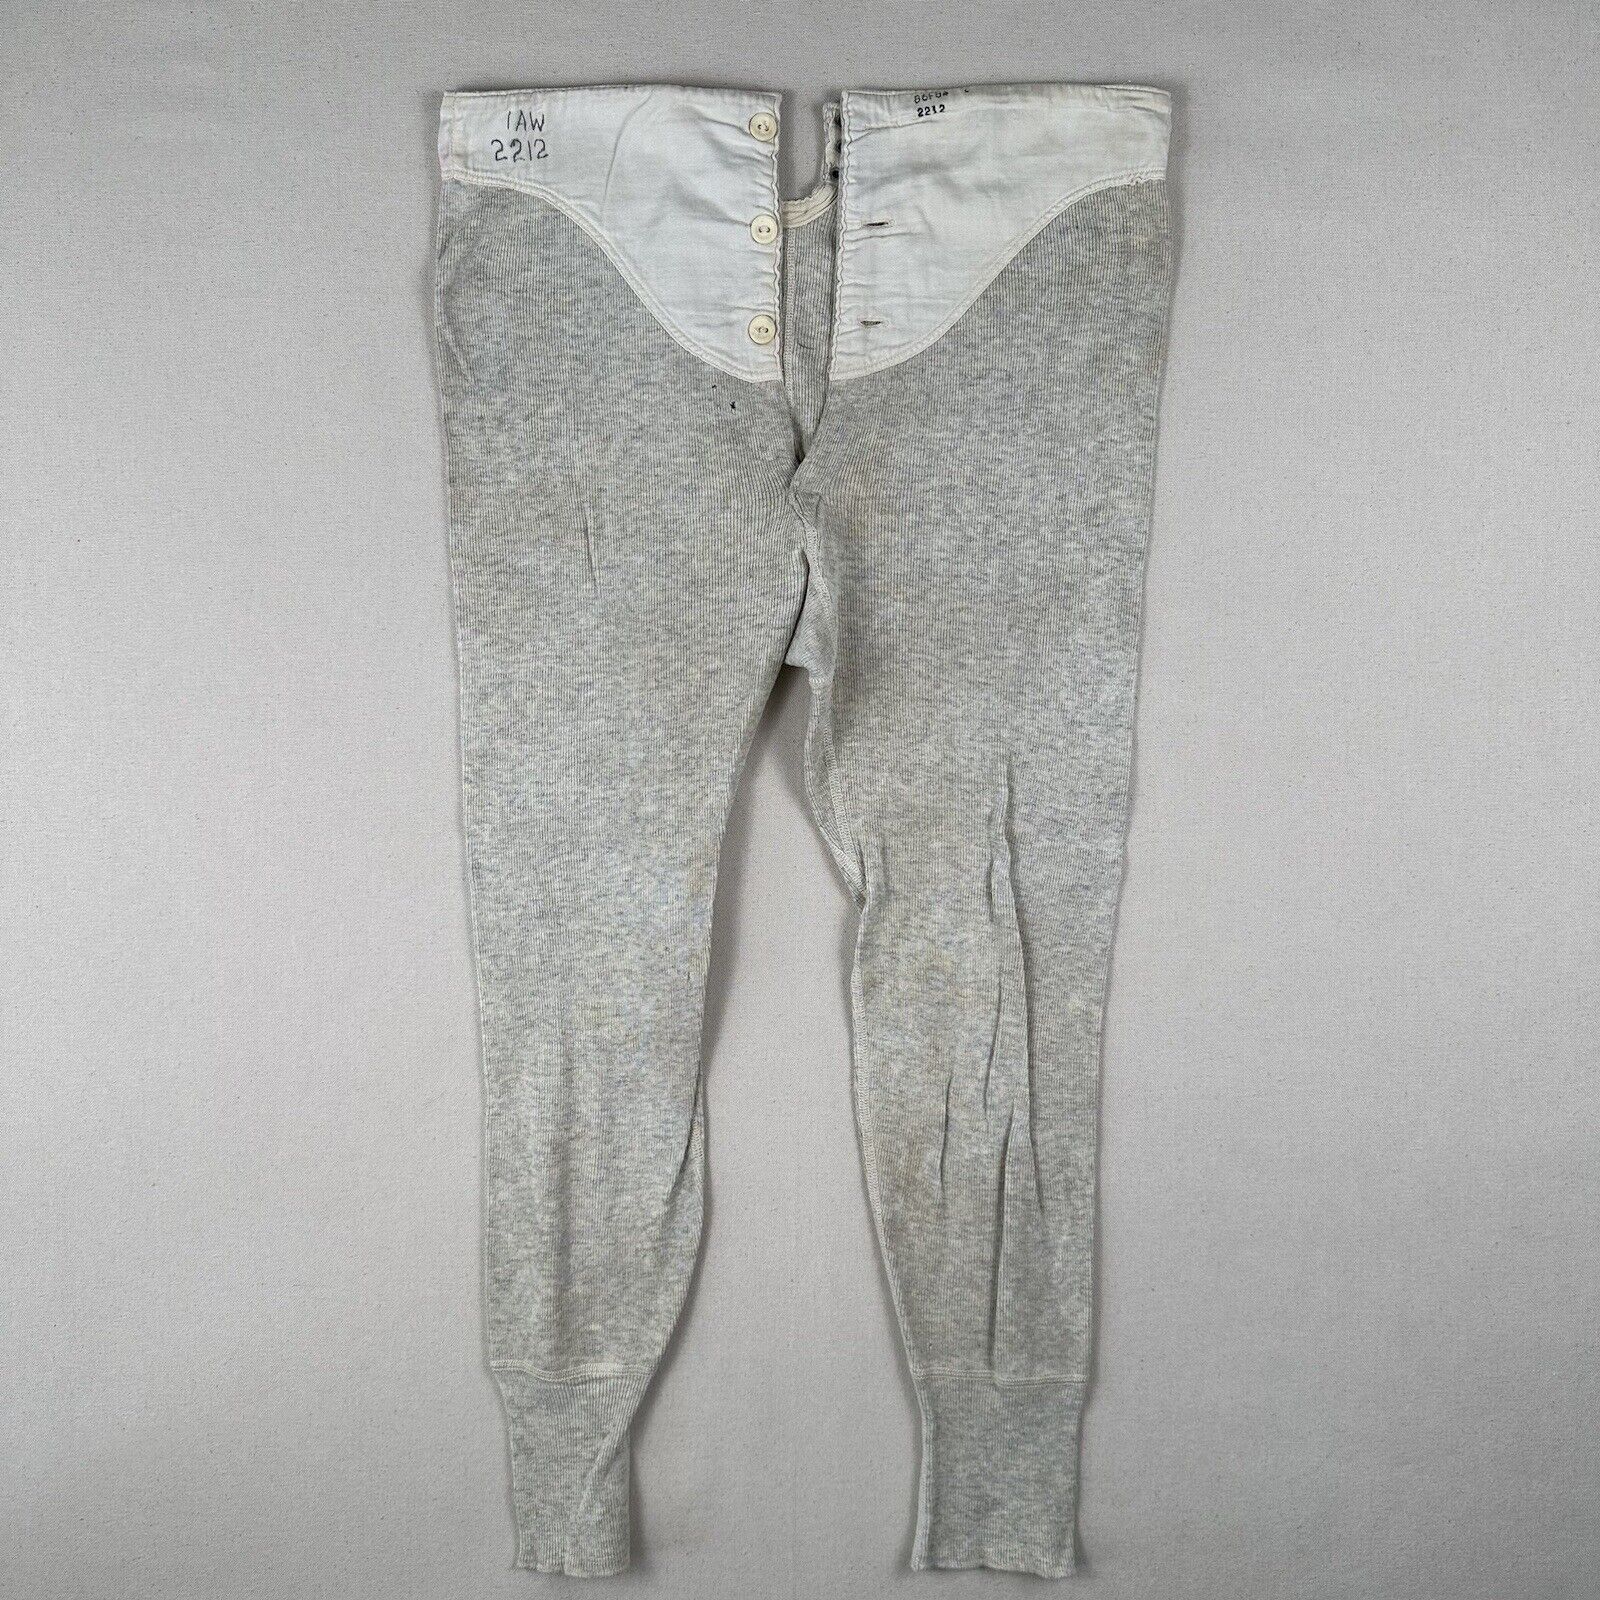 WW2 WWII US Military Thermal Wool Blend Pants Mens 32 Gray Distressed Long Johns